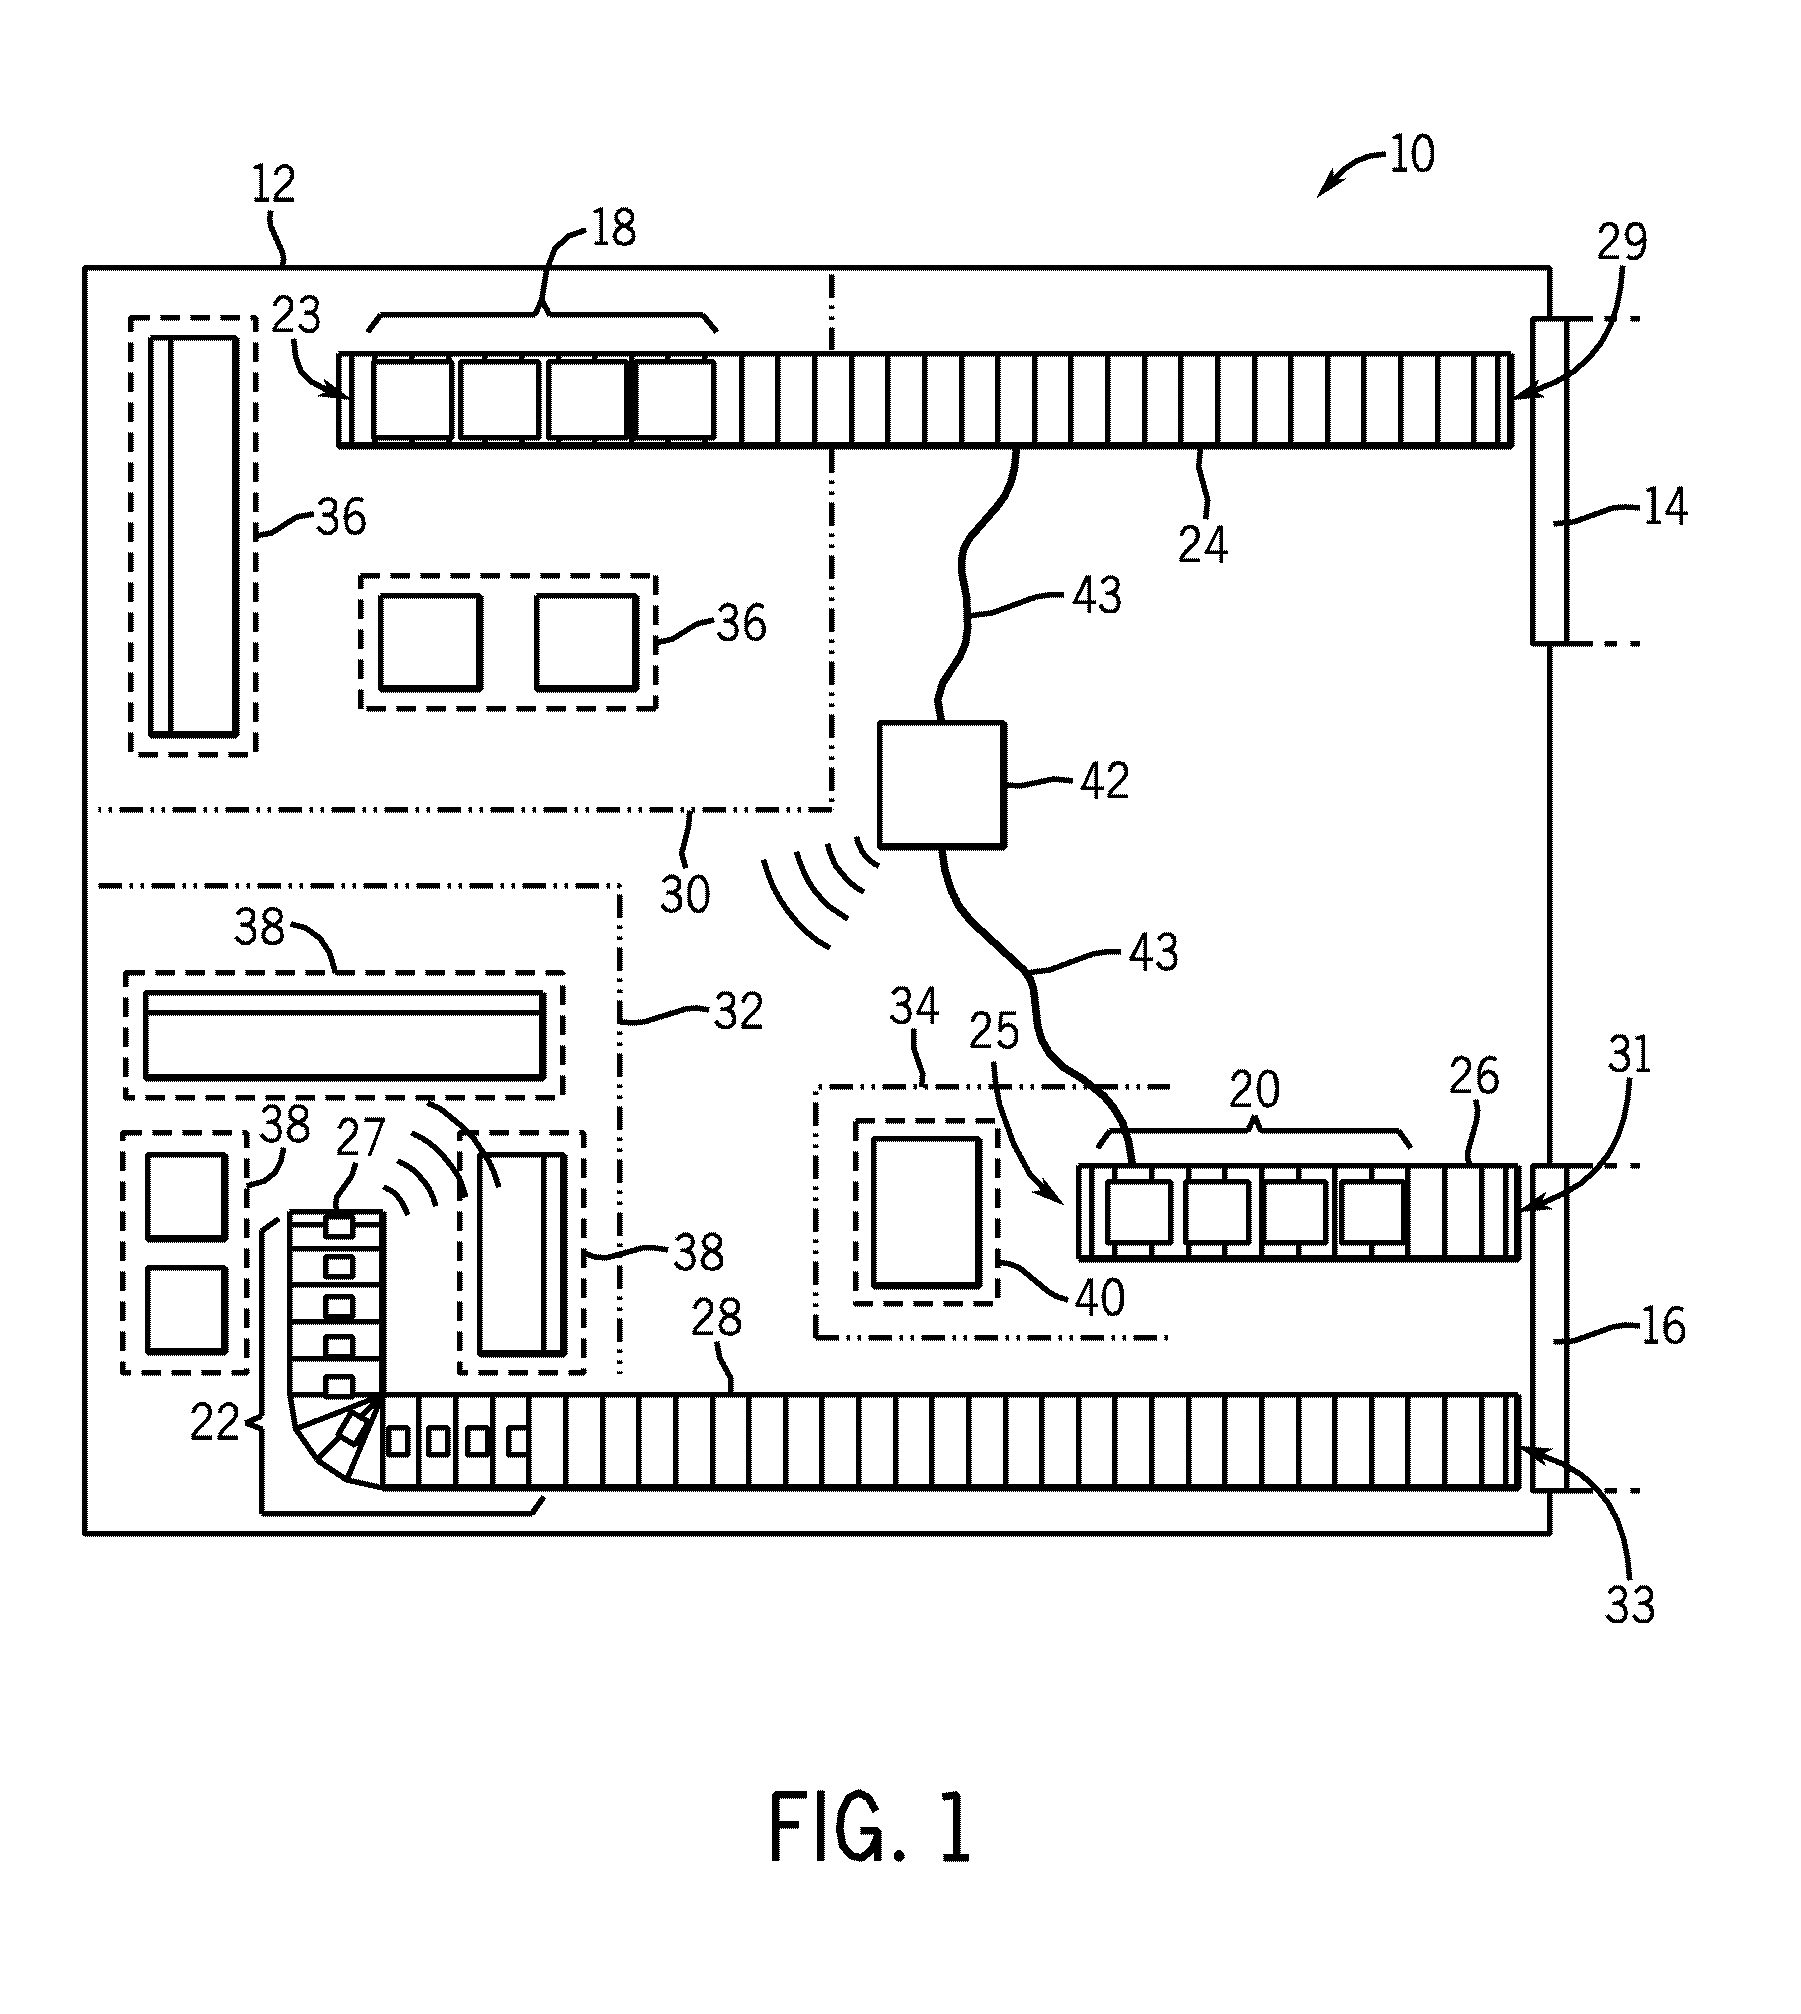 Welding inventory tracking, storing, and distribution system